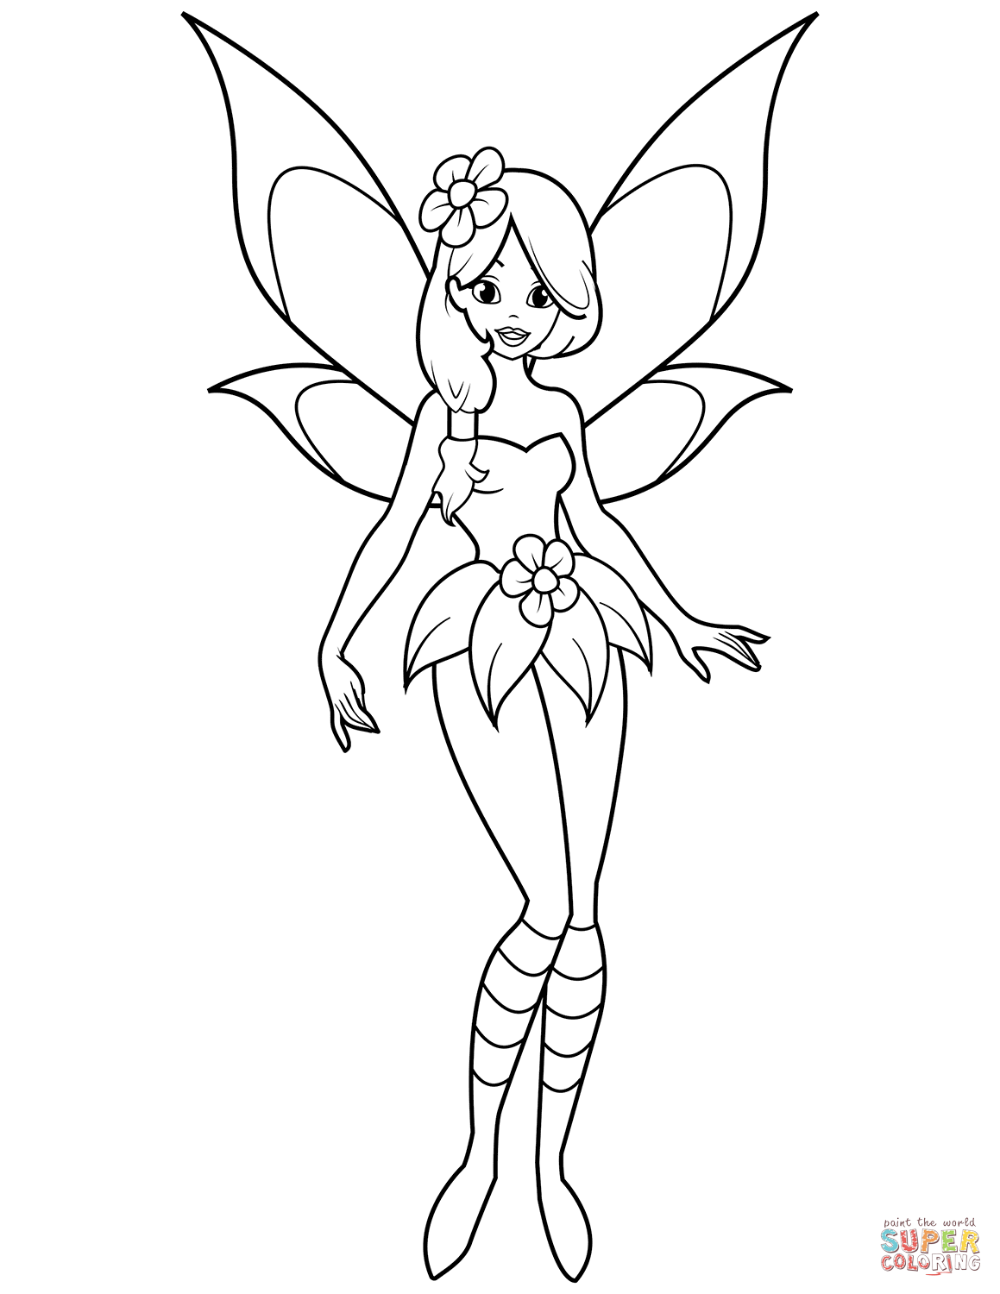 Fairy coloring page free printable coloring pages fairy coloring fairy coloring book fairy coloring pages